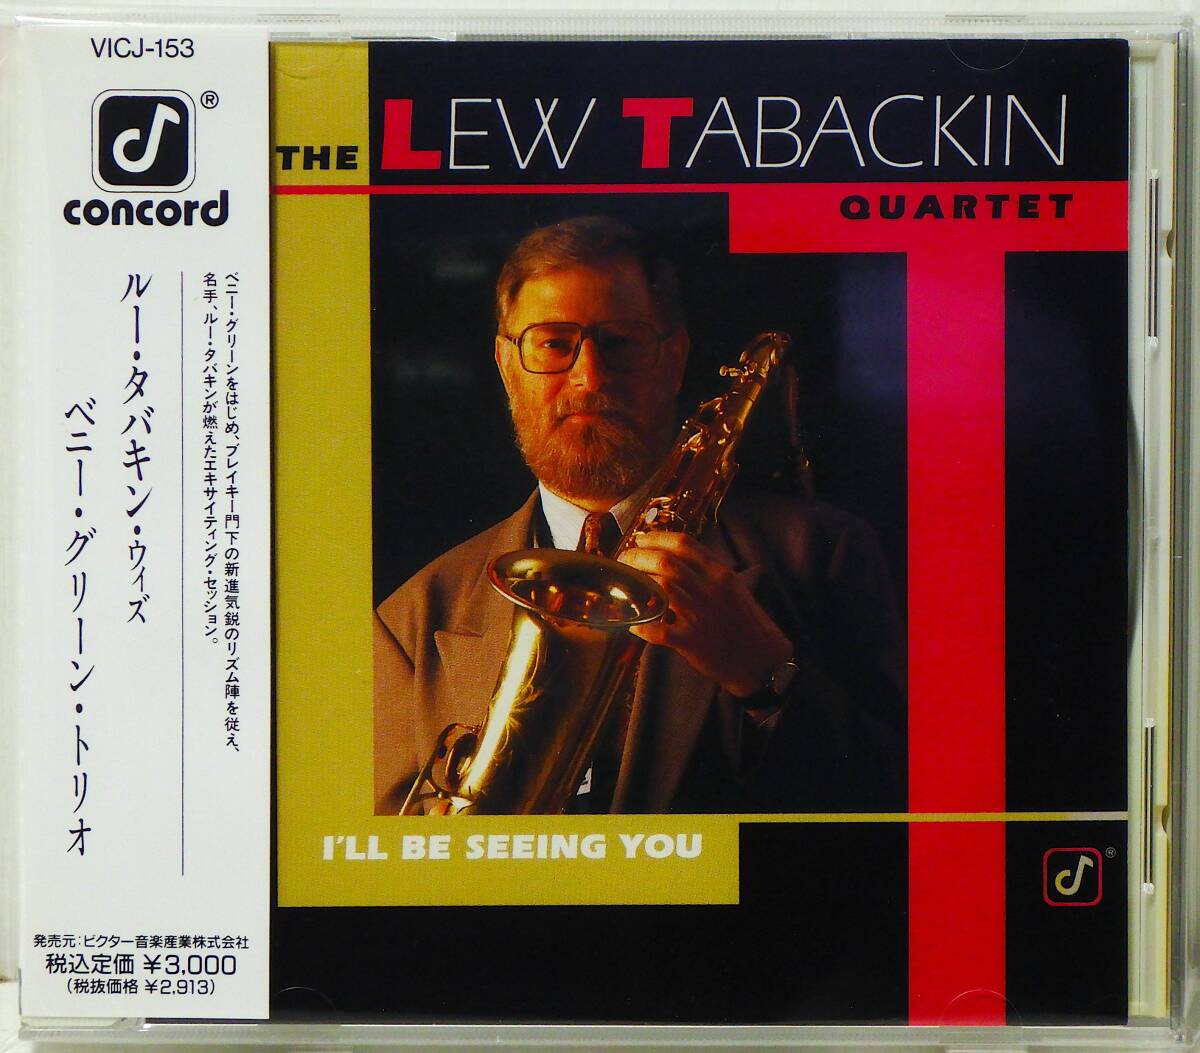 RARE ! 見本盤 ルー タバキン ウィズ ベニー グリーン トリオ PROMO ! LEW TABACKIN I'LL BE SEEING YOU VICJ-153 WITH OBI_画像1